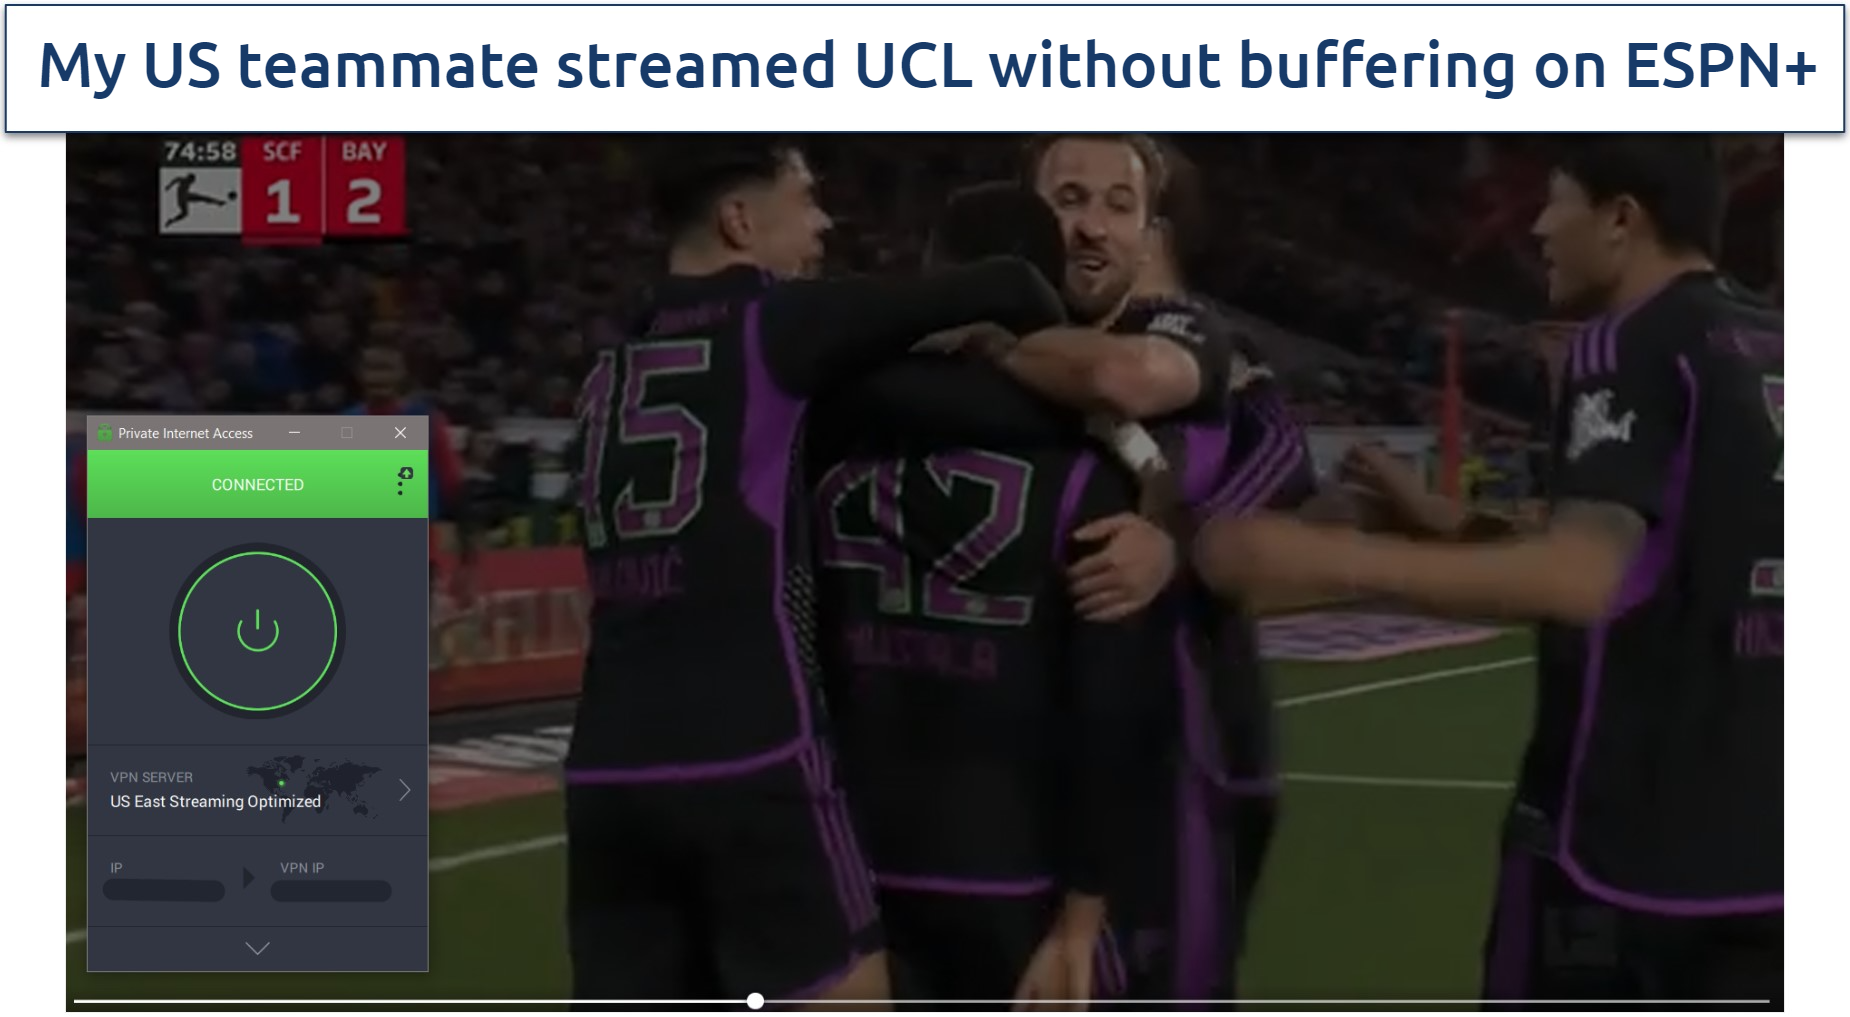 Screenshot of UCL on ESPN, with VPN connected to an US streaming server